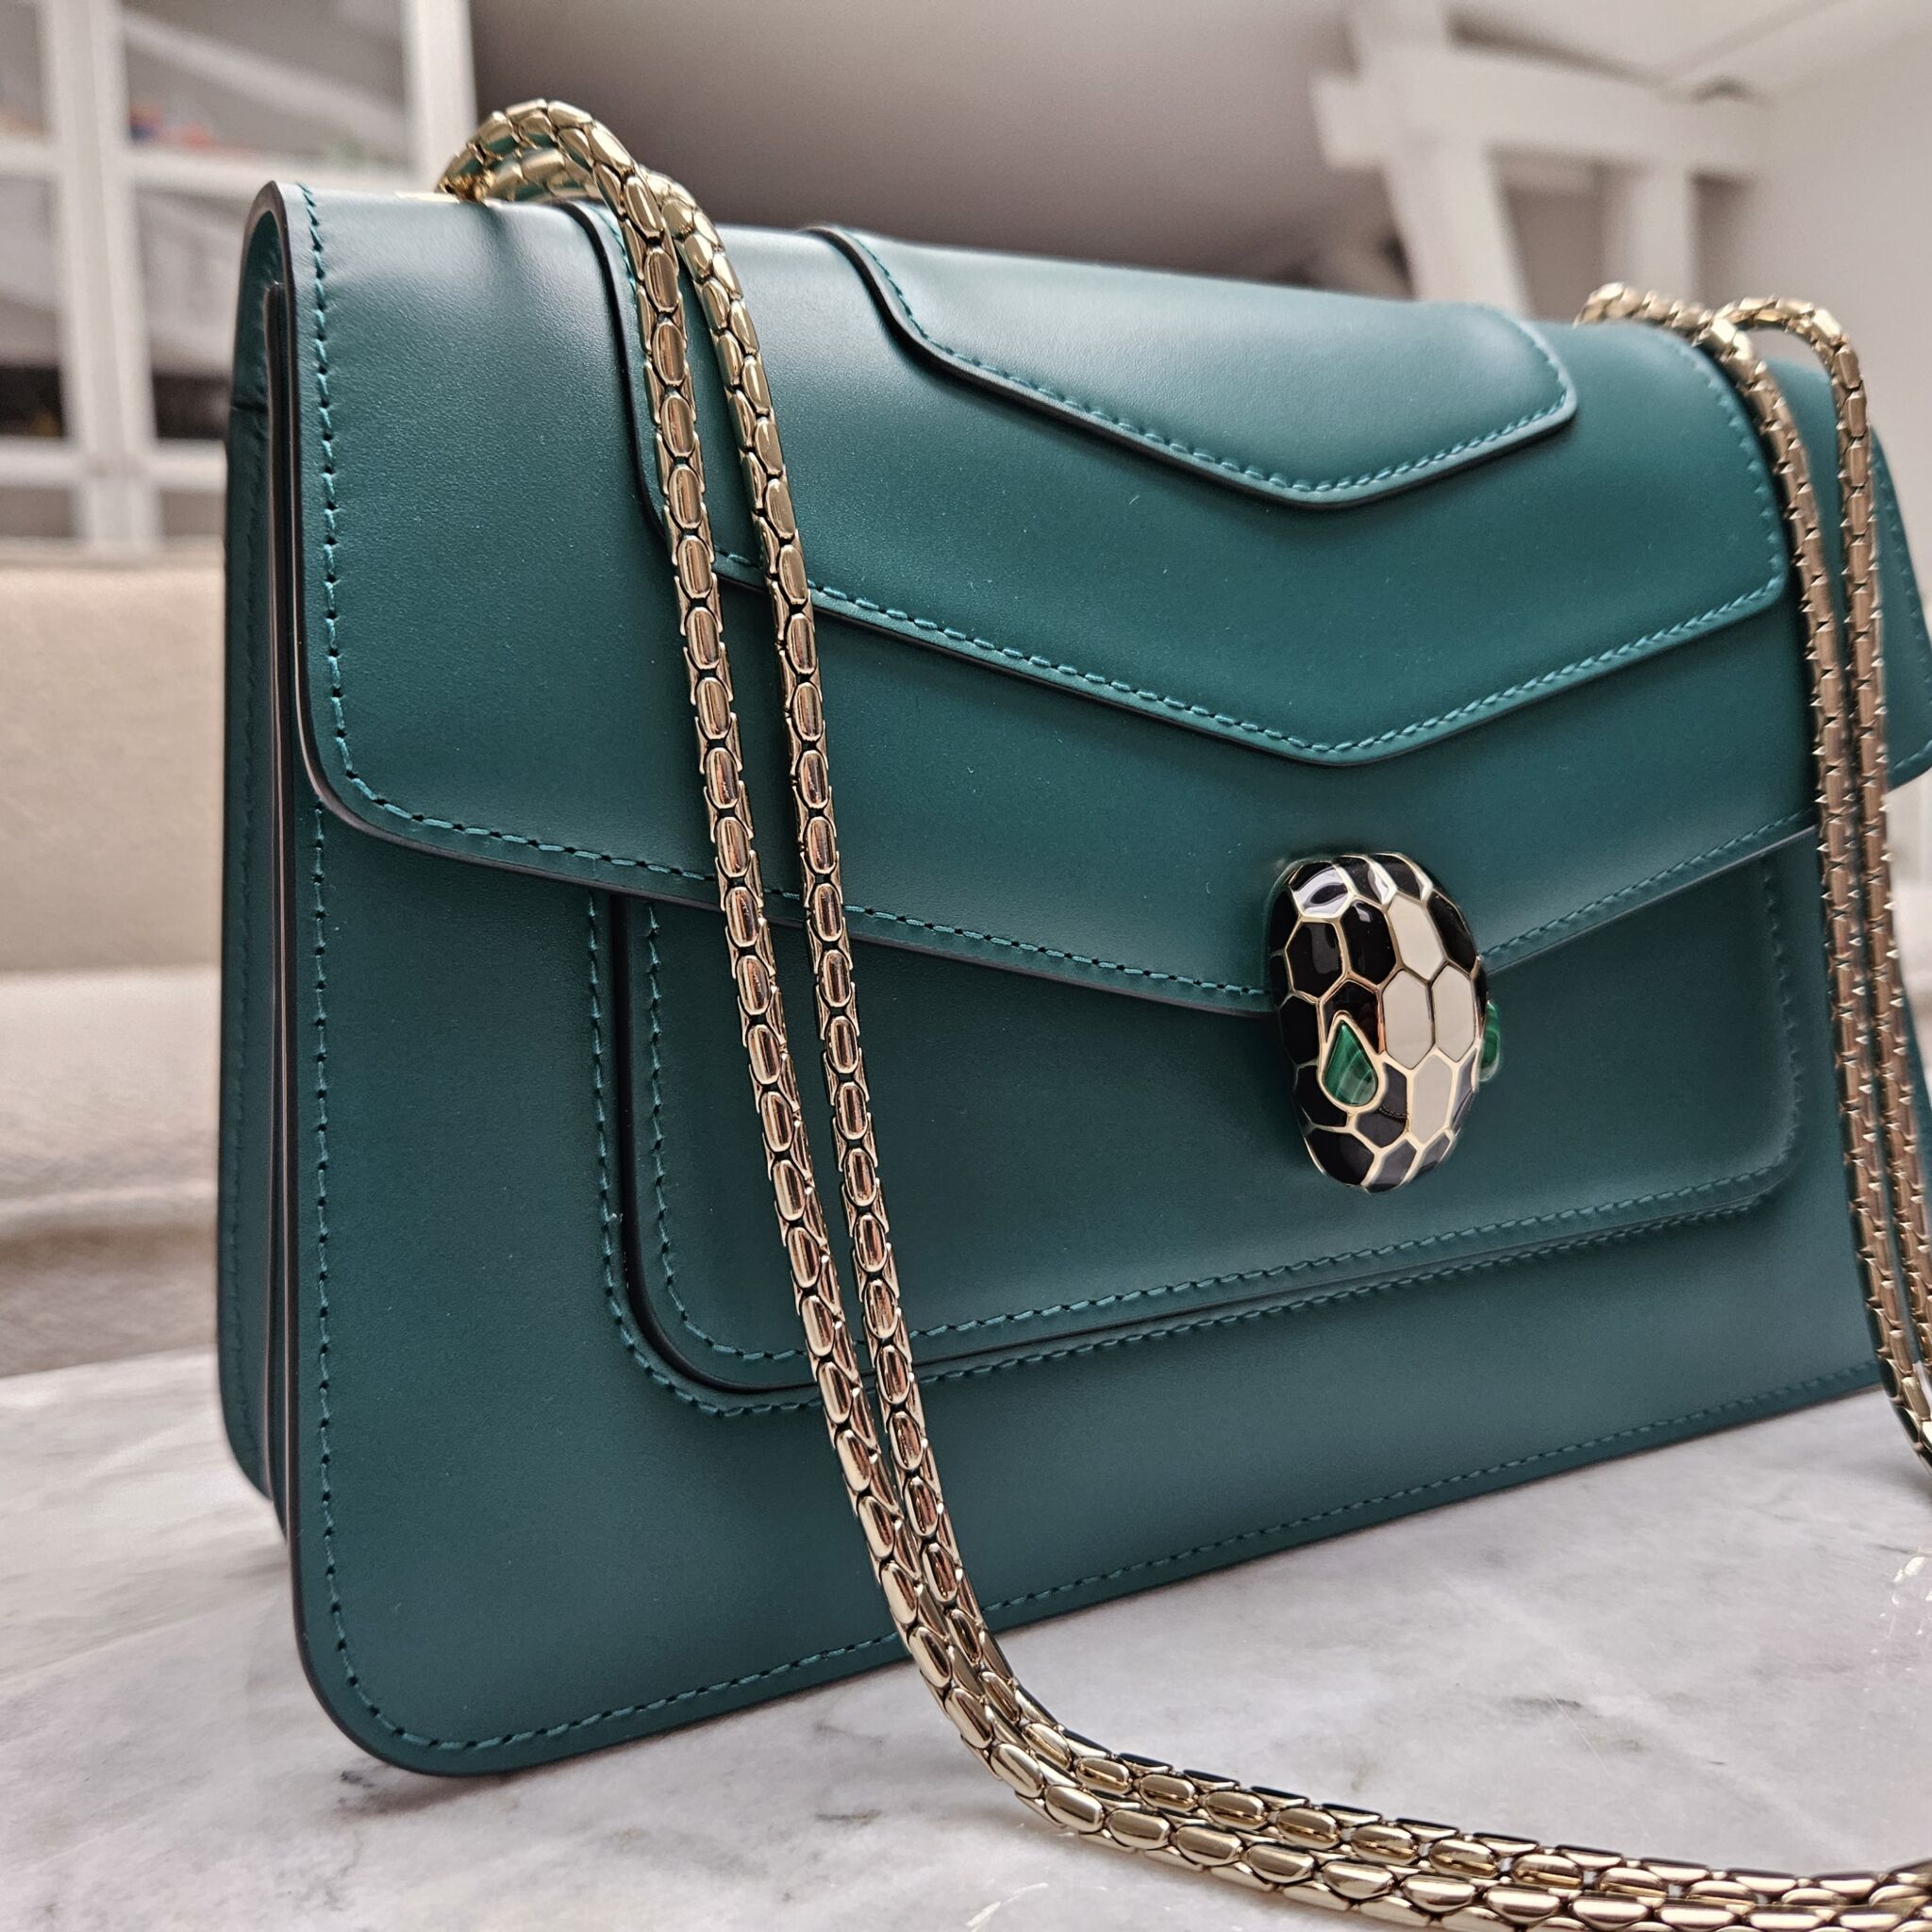 Bvlgari Women's Serpenti Forever Leather Shoulder Bag - Emerald Green One-Size